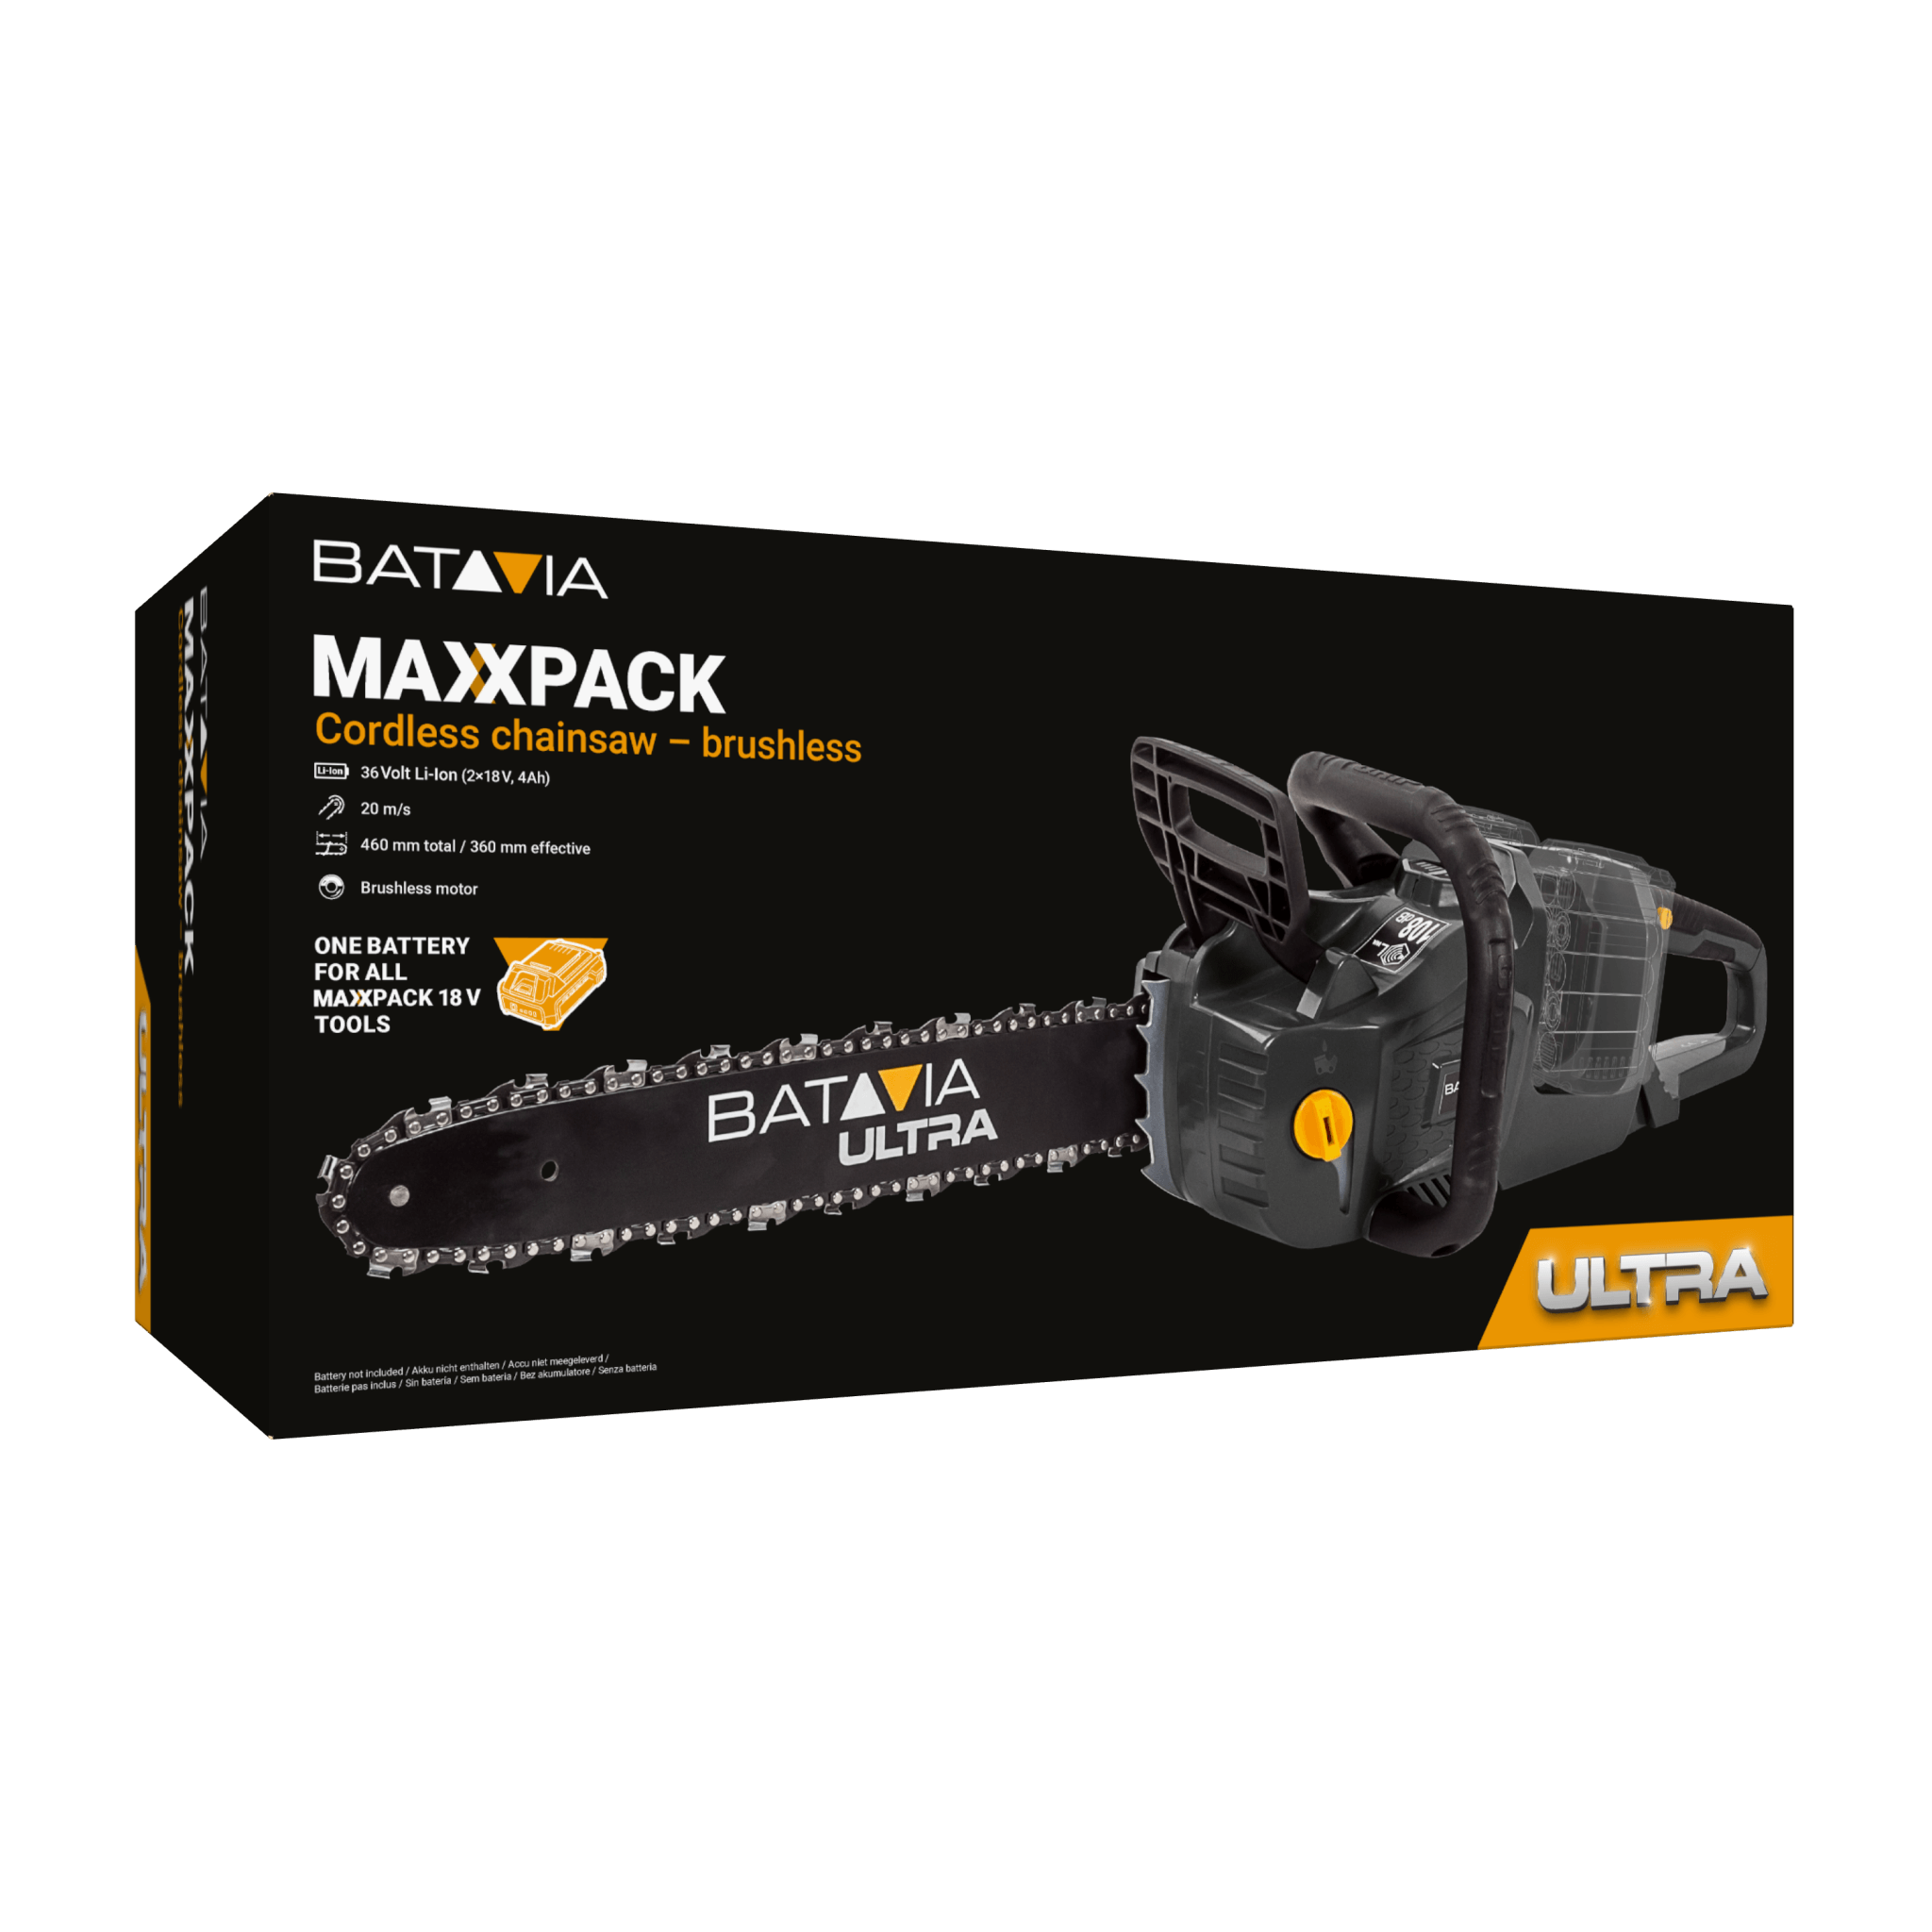 Batavia electric chainsaw packaging | Maxxpack collection